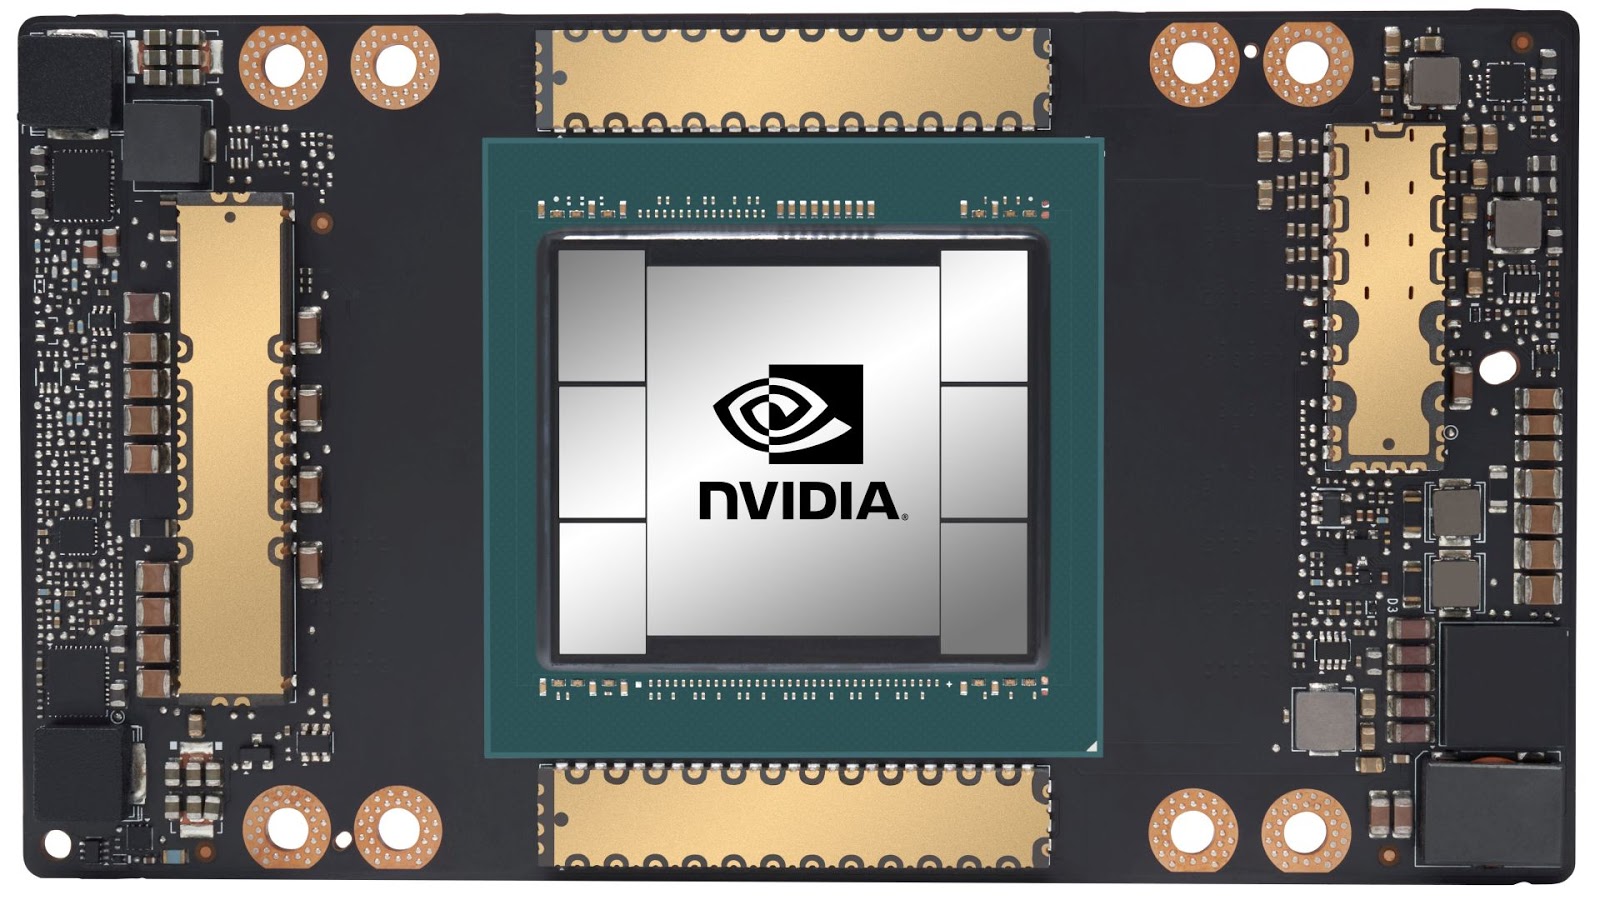 NVIDIA Ampere A100 PCle